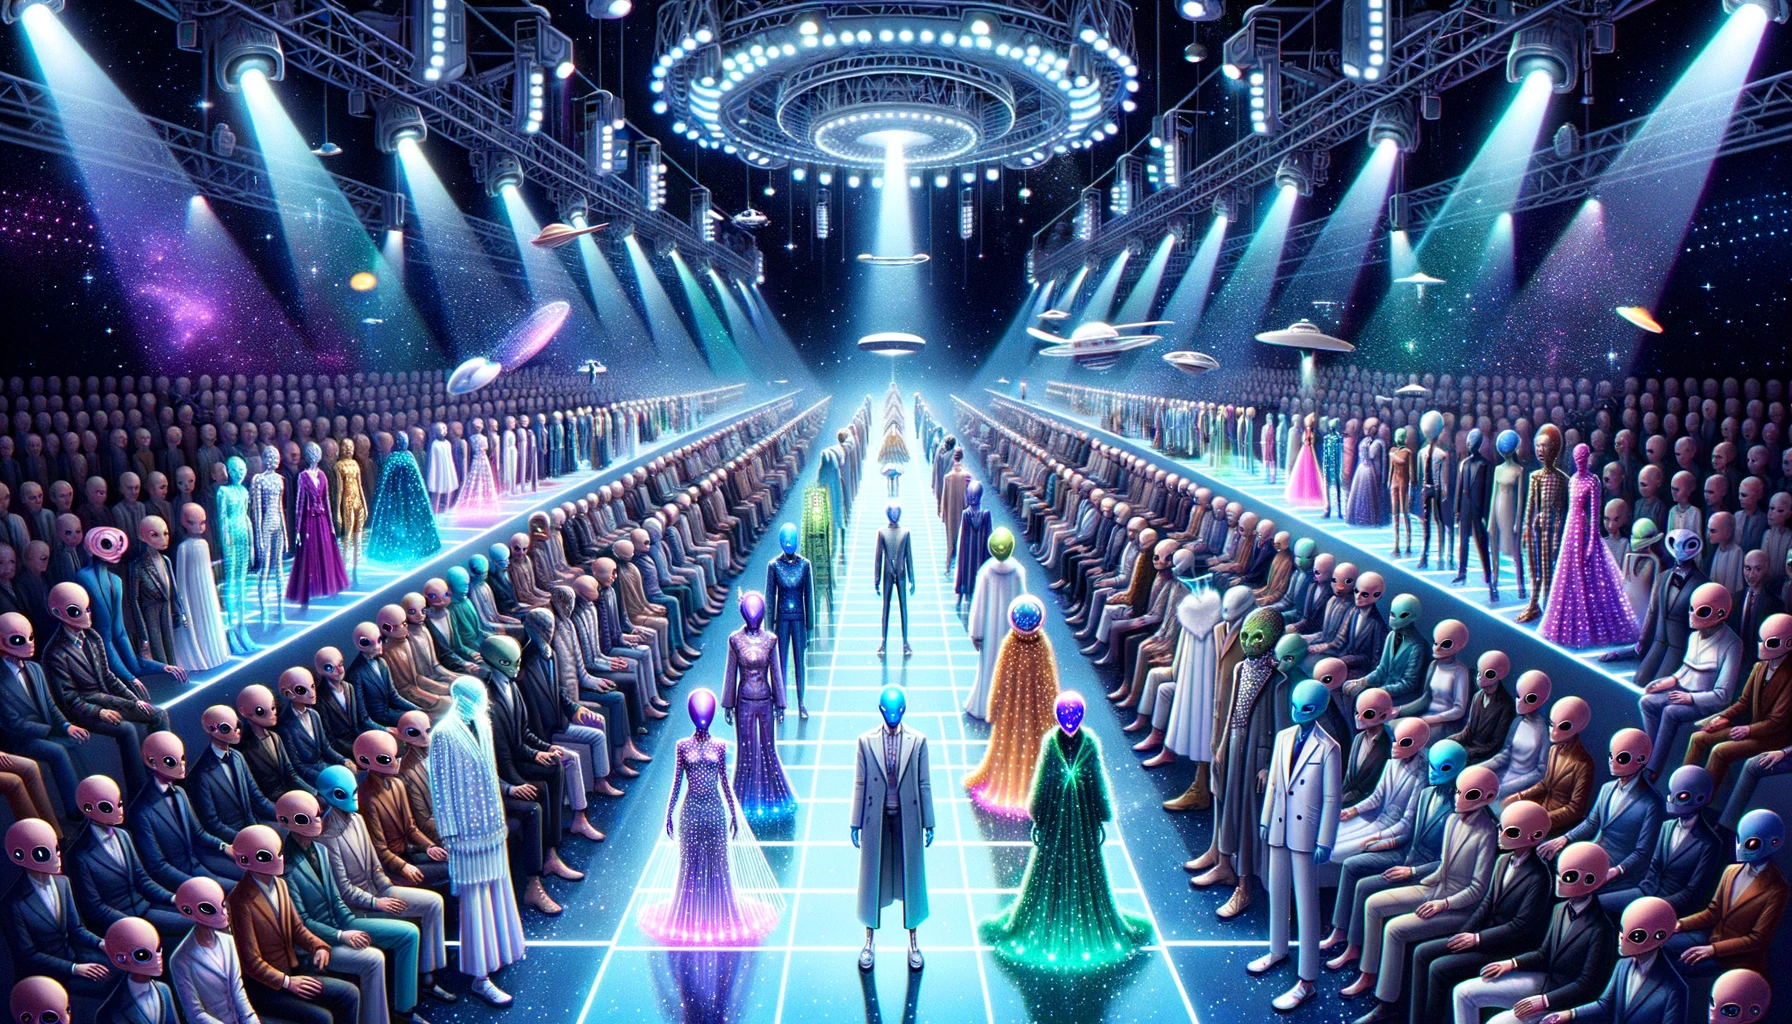 Illustration of a state-of-the-art fashion show. The runway, illuminated by advanced lighting, serves as the stage for models displaying innovative outfits. Some wear garments that seem to be made of beams of light, others have holographic accessories that change and adapt, and yet others wear clothes made of sustainable fabrics. The audience is a spectacle in itself, consisting of humanoid aliens from various galaxies. Their diverse skin tones, eye configurations, and attire make it clear that this is a truly intergalactic event.